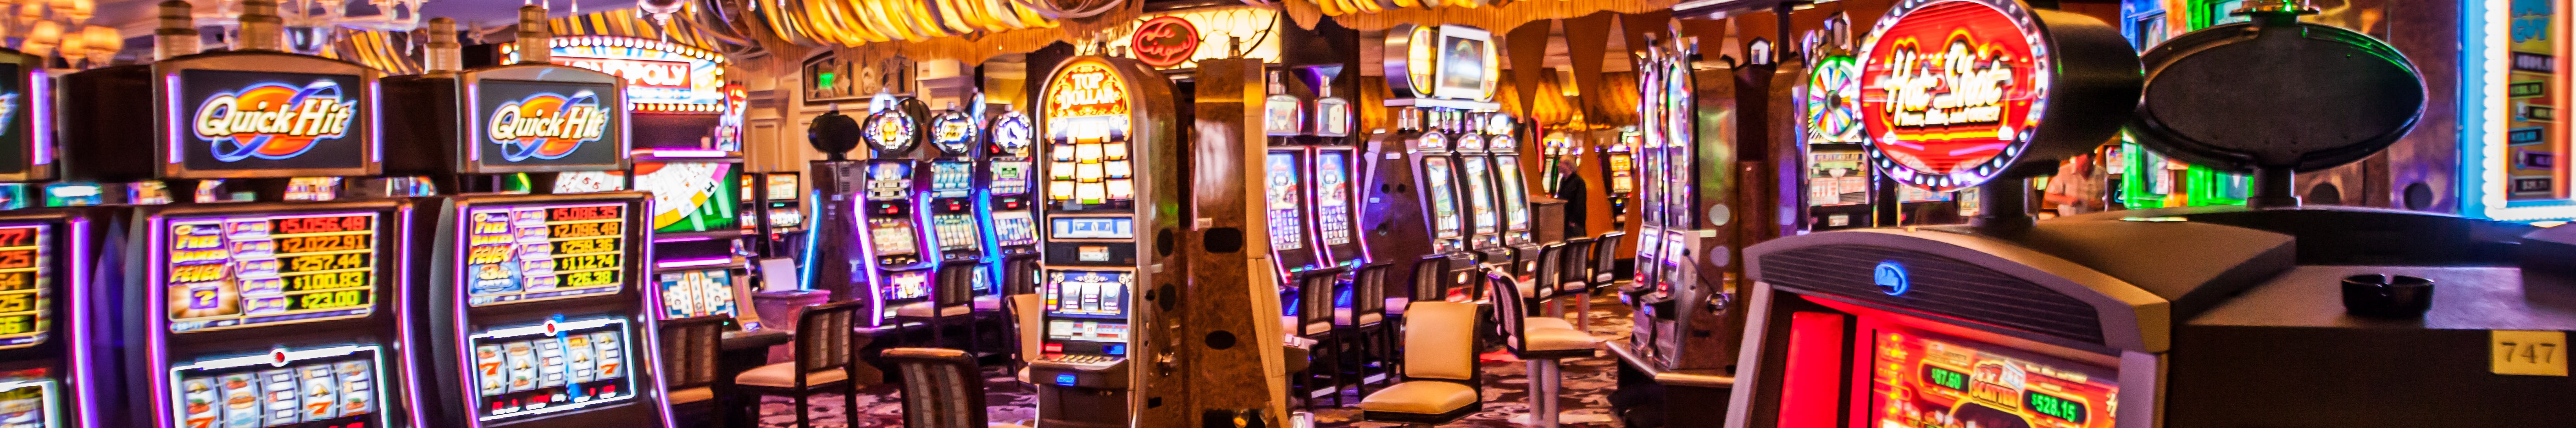 Each year, MGM Resorts casinos entertain millions of guests around their gaming tables